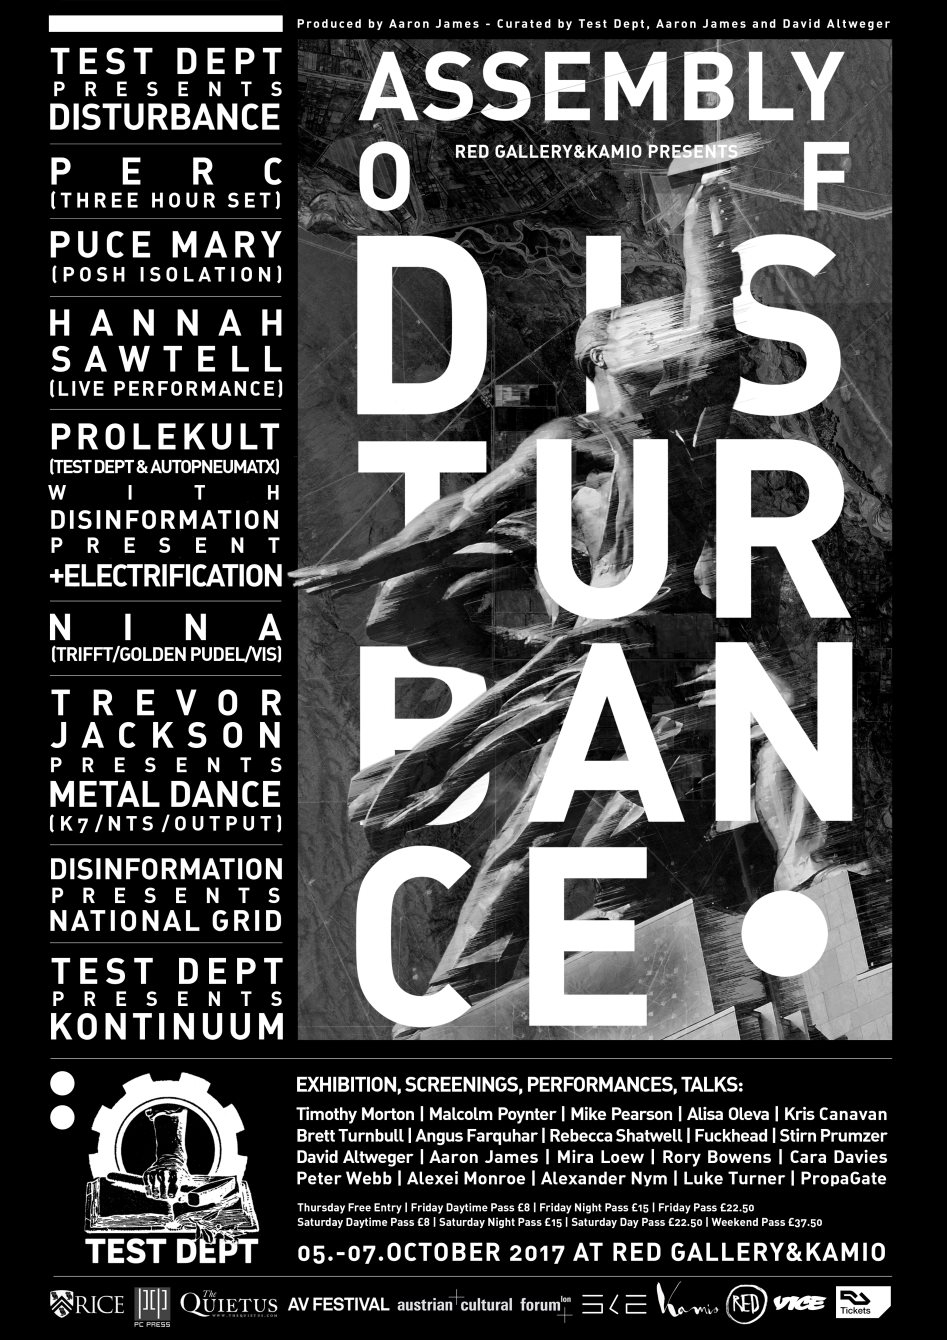 Assembly of Disturbance - Flyer front